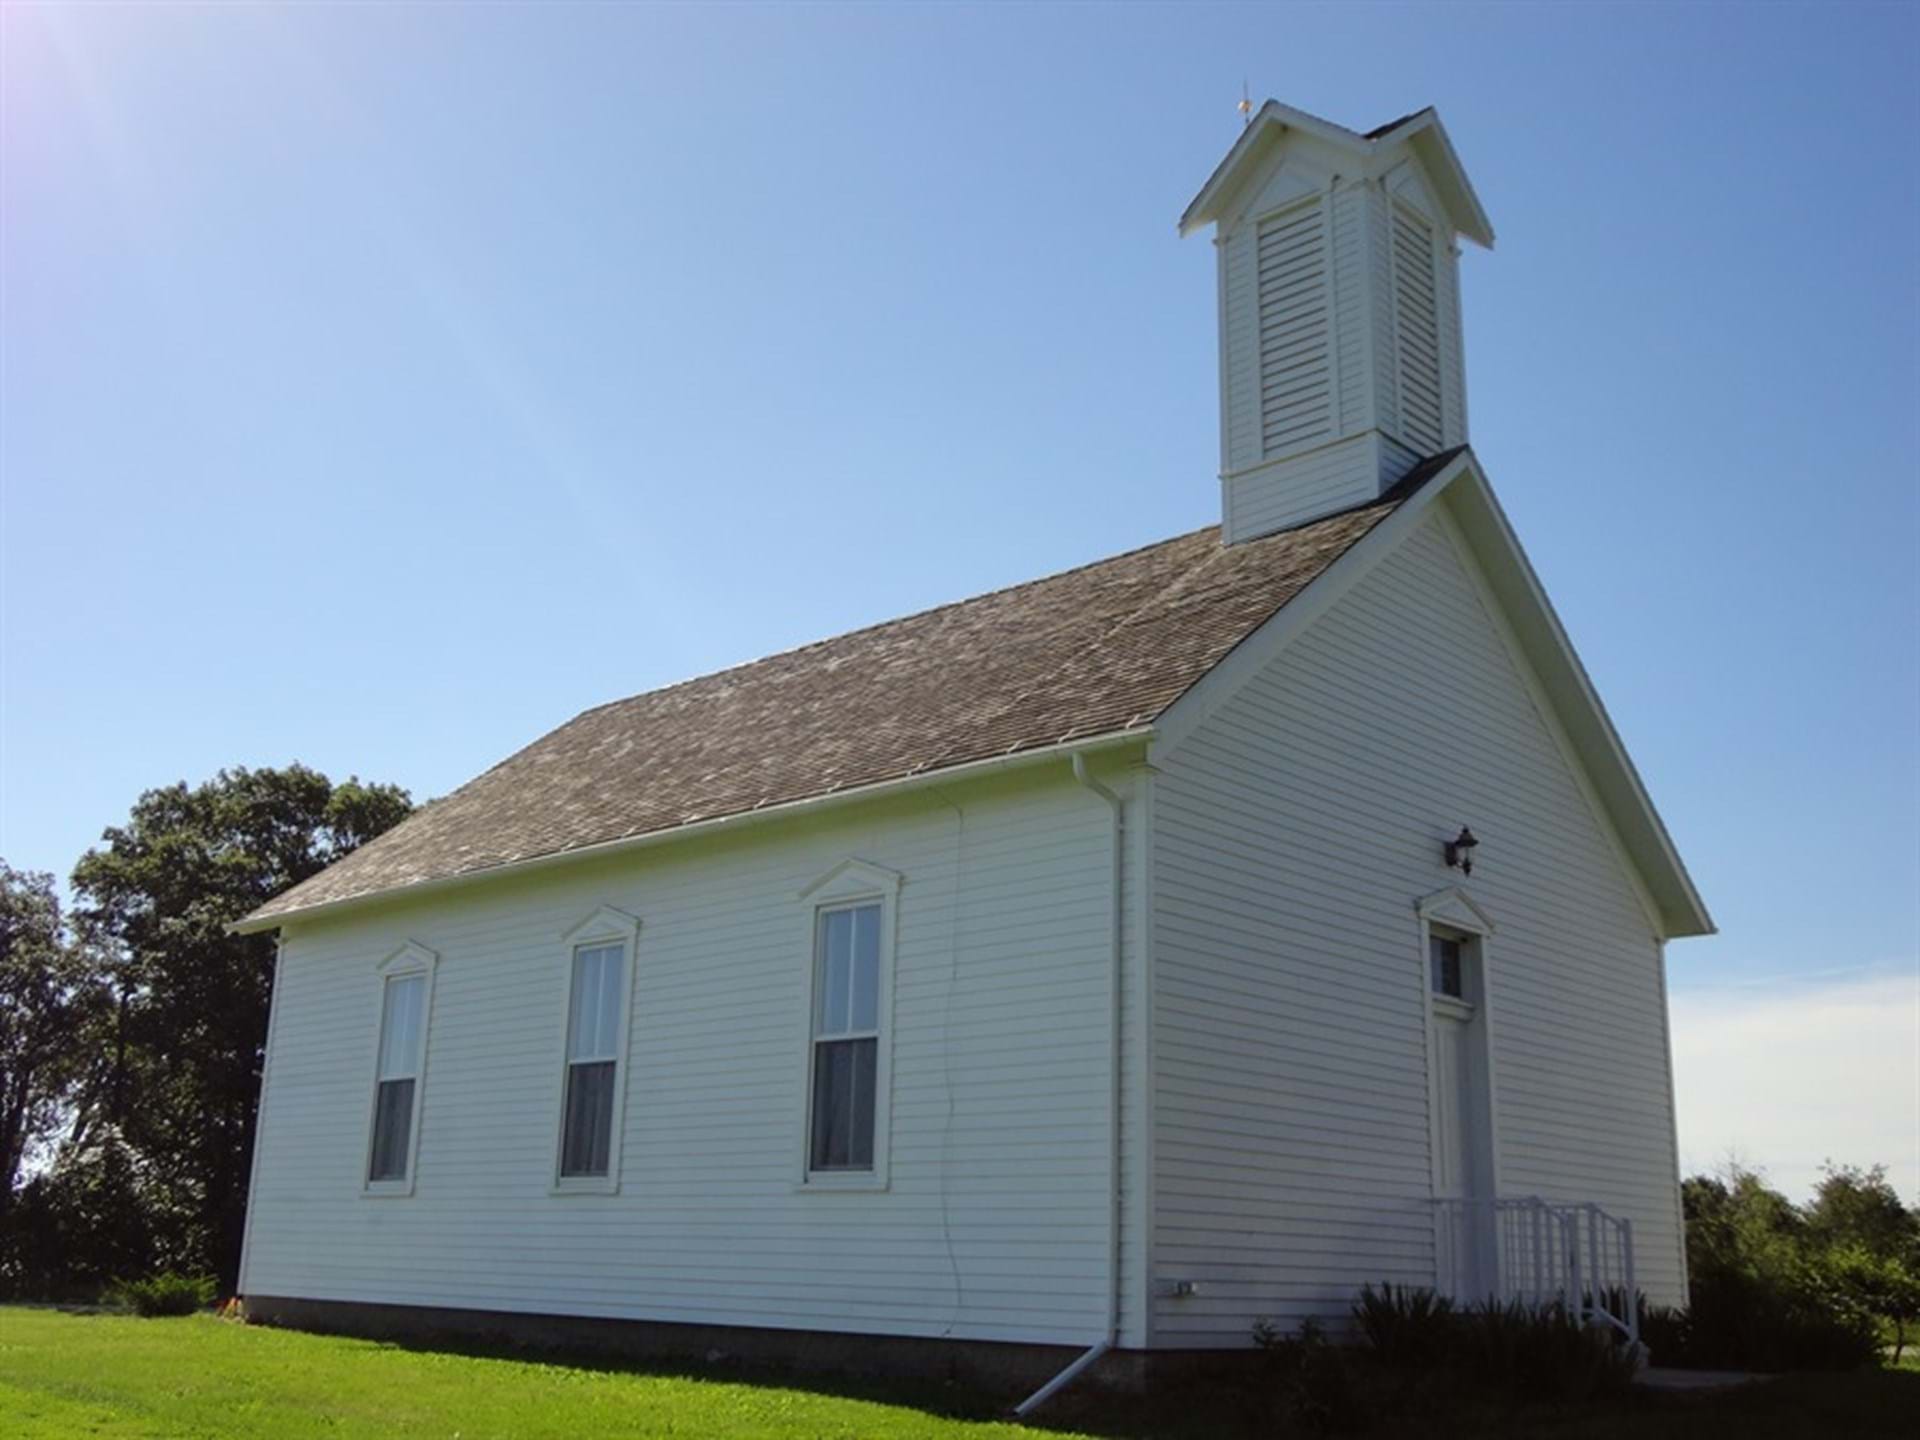 The original 1880 Franklin Baptist Church building that was restored in its original location and is now on the National Register of Historic Places